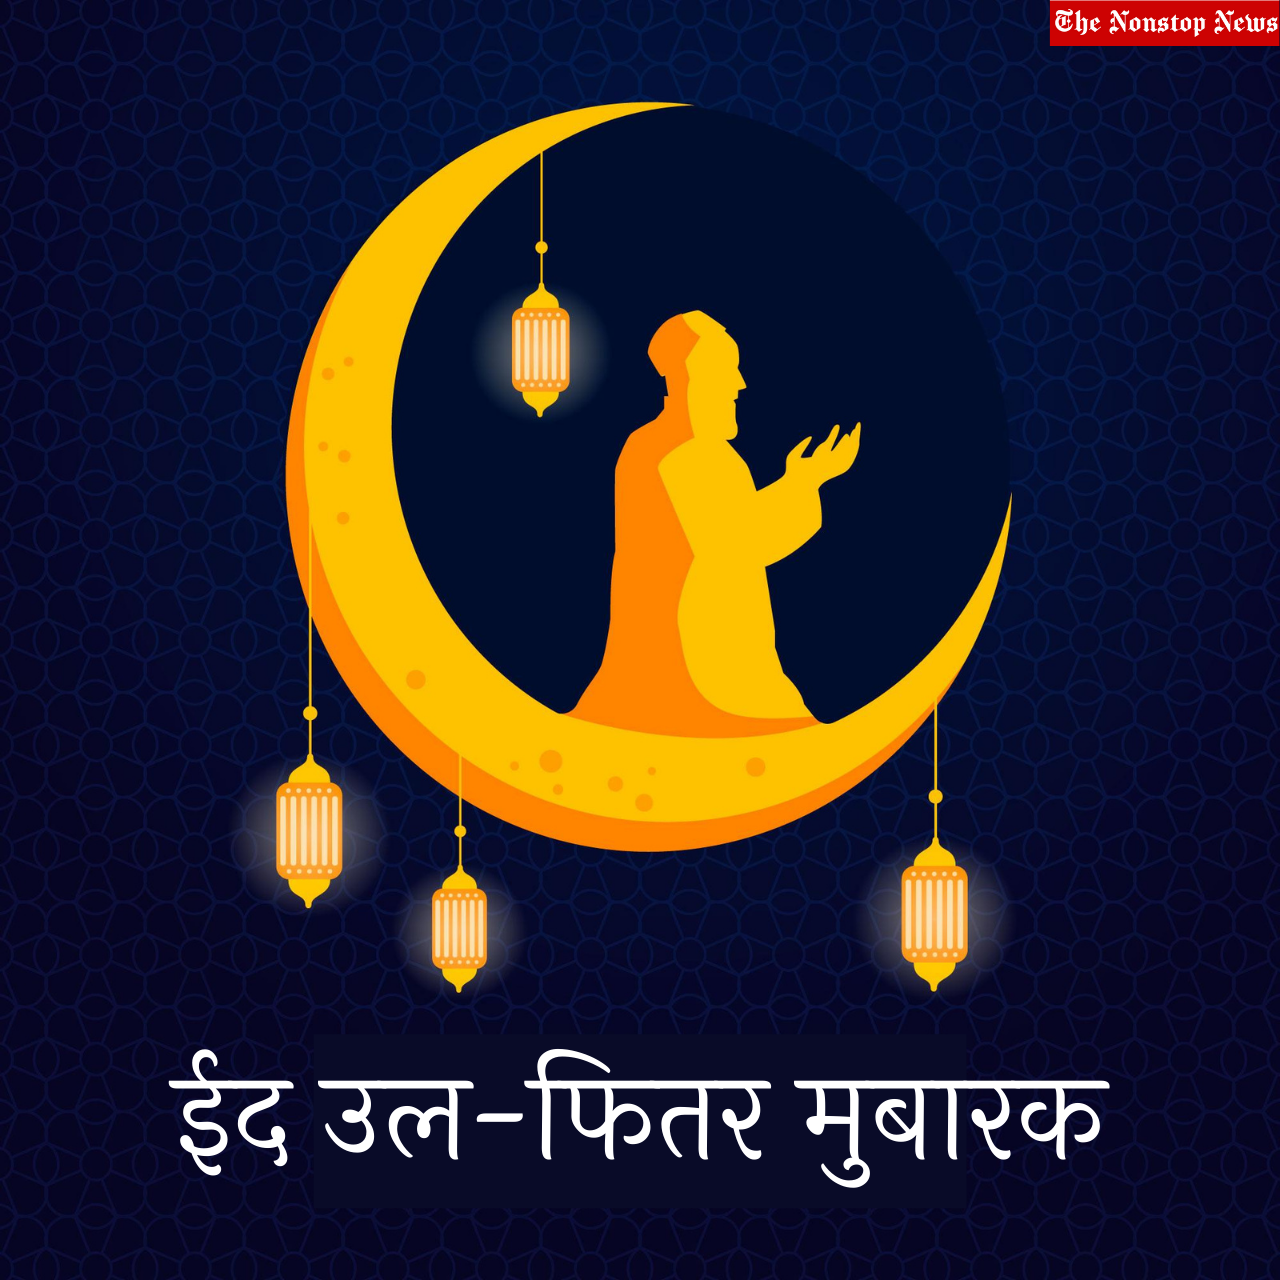 Eid Ul-Fitr 2022: Hindi Wishes, Greetings, Quotes, Messages, Shayari, Images To Share